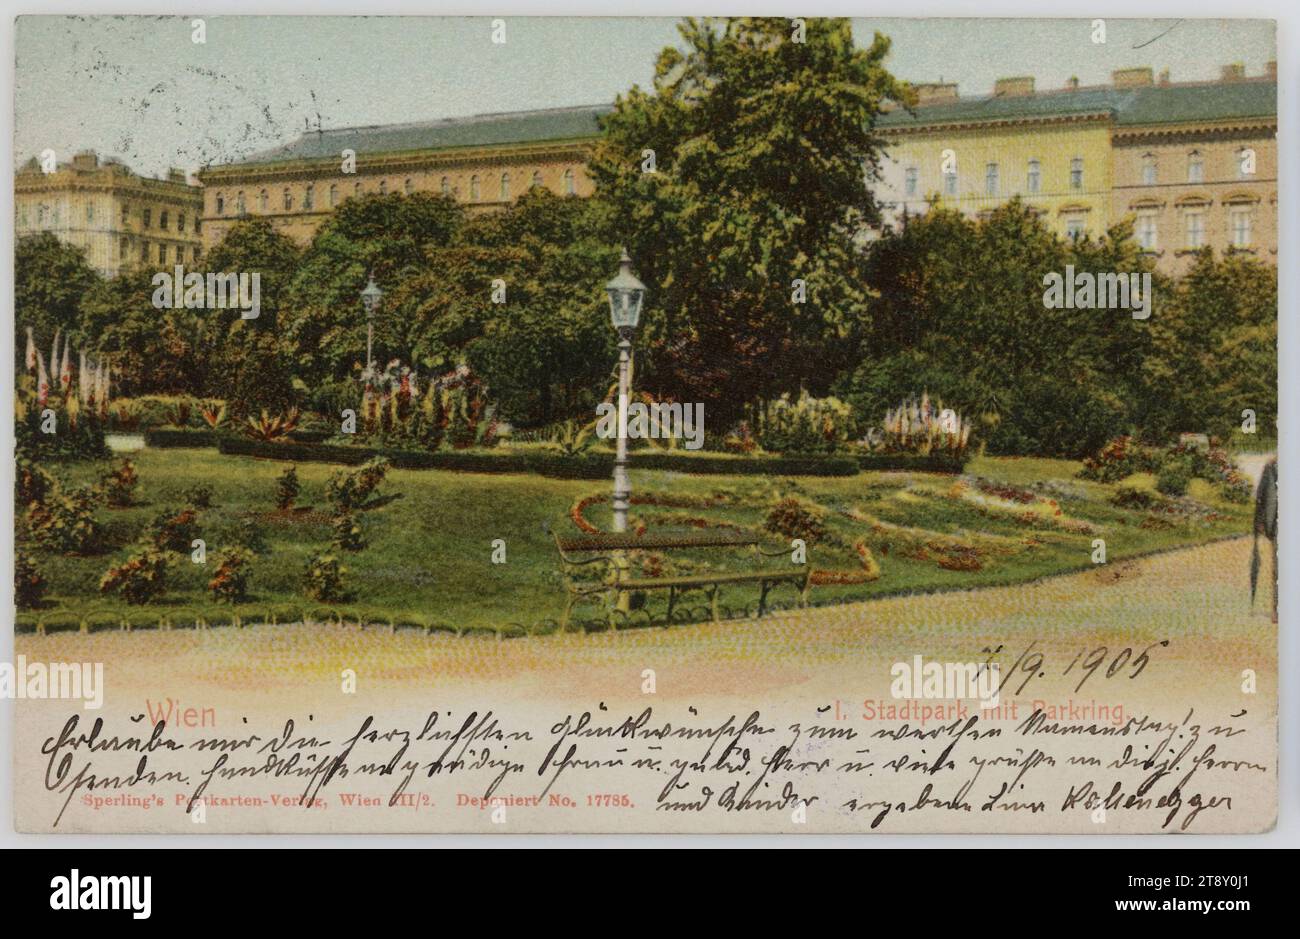 Vienna I. City Park with Parkring, Sperlings Postkartenverlag (M. M. S.), Producer, 1905, coated paperboard, heliochrome print, Inscription, FROM, Vienna, TO, Krumbach, ADDRESS, H. H. Frau Marie, Krumbach a, d. Aspangb., N. Ö., MESSAGE, 7., 9. 1905 Allow me to send the warmest congratulations on the precious name day, hand kisses to gnädige Frau u. gnäd. Lord and many greetings to j. Herrn und Kinder ergebene Lina Kaltenegger, Ringstraße, Park, Media and Communication, Postcards with transliteration, 1st District: Innere Stadt, public gardens, park Stock Photo